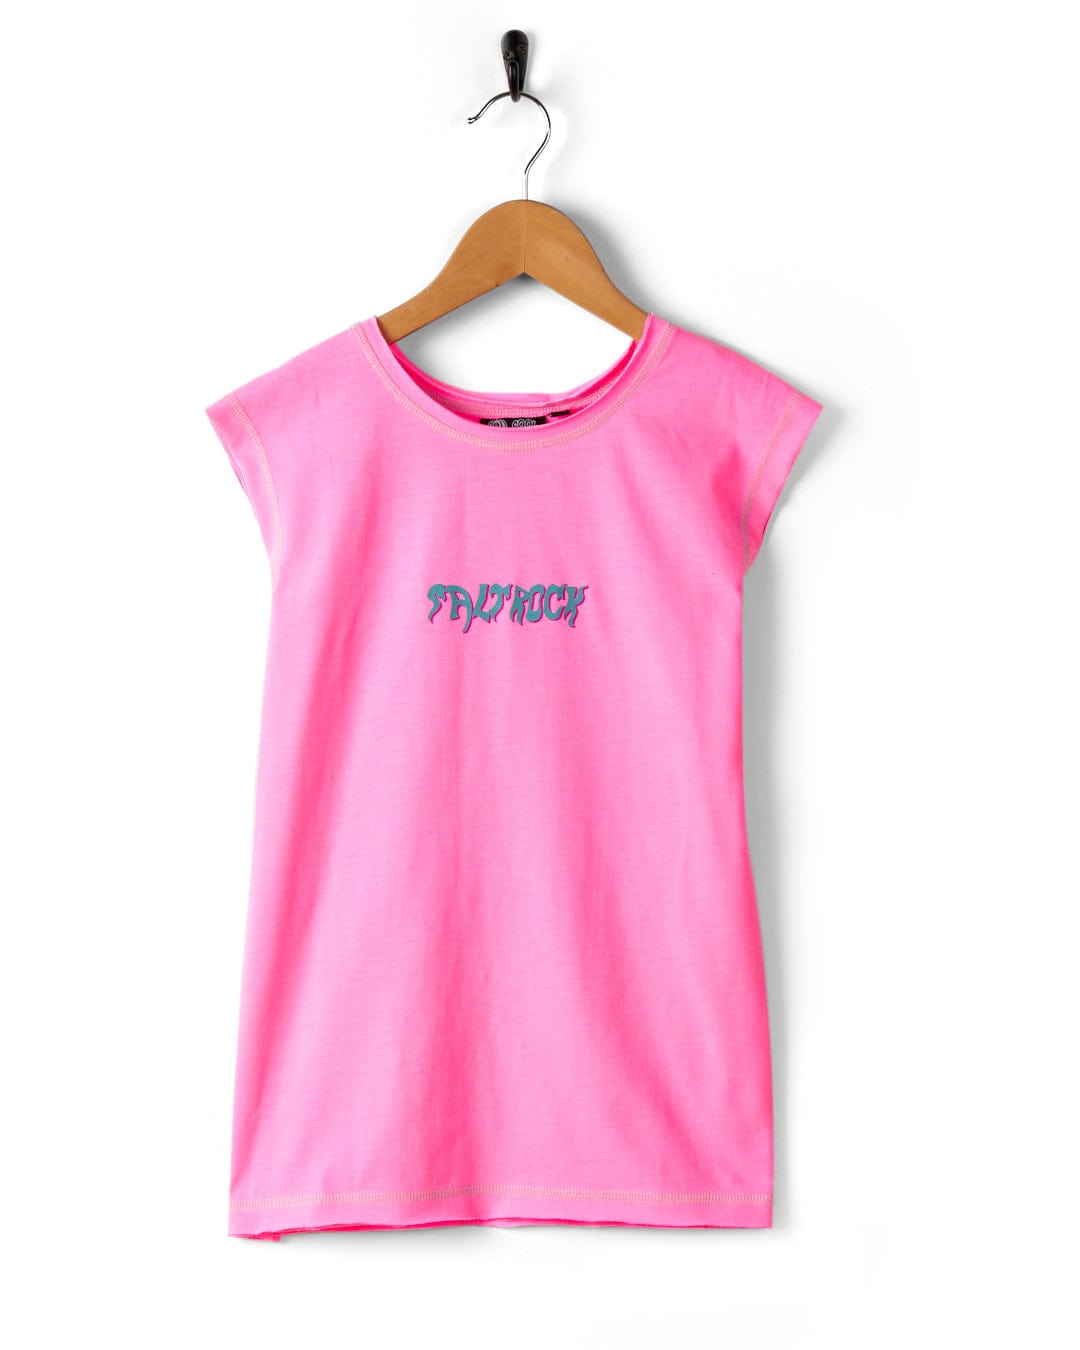 A pink Mystic Skulls - Recycled Kids Longline Vest with the word "FEMINIST" in blue print, hanging on a wooden hanger against a white background.